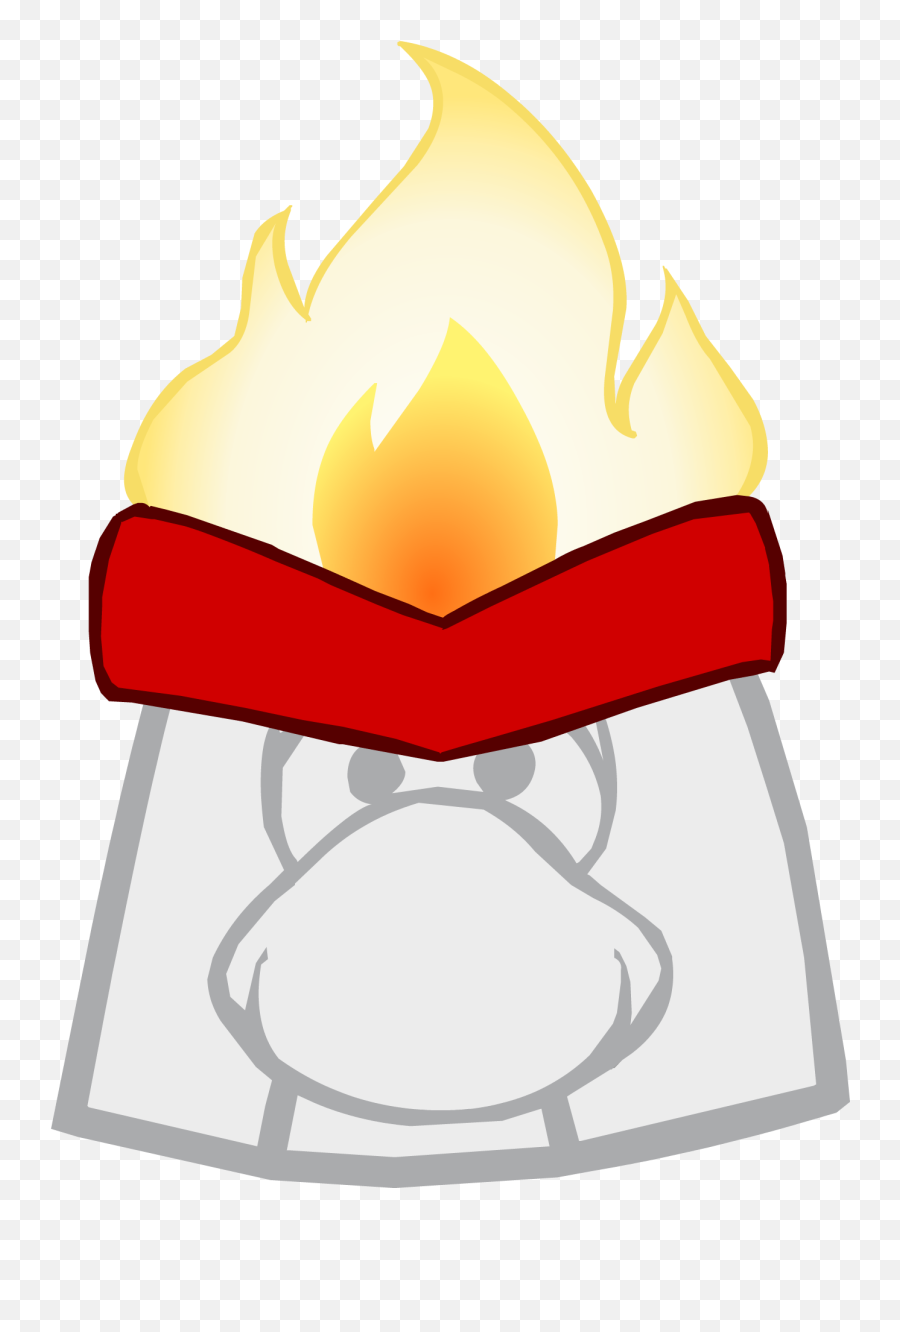 The Anger Club Penguin Wiki Fandom - Club Penguin Side Ponytail Png,Anger Icon